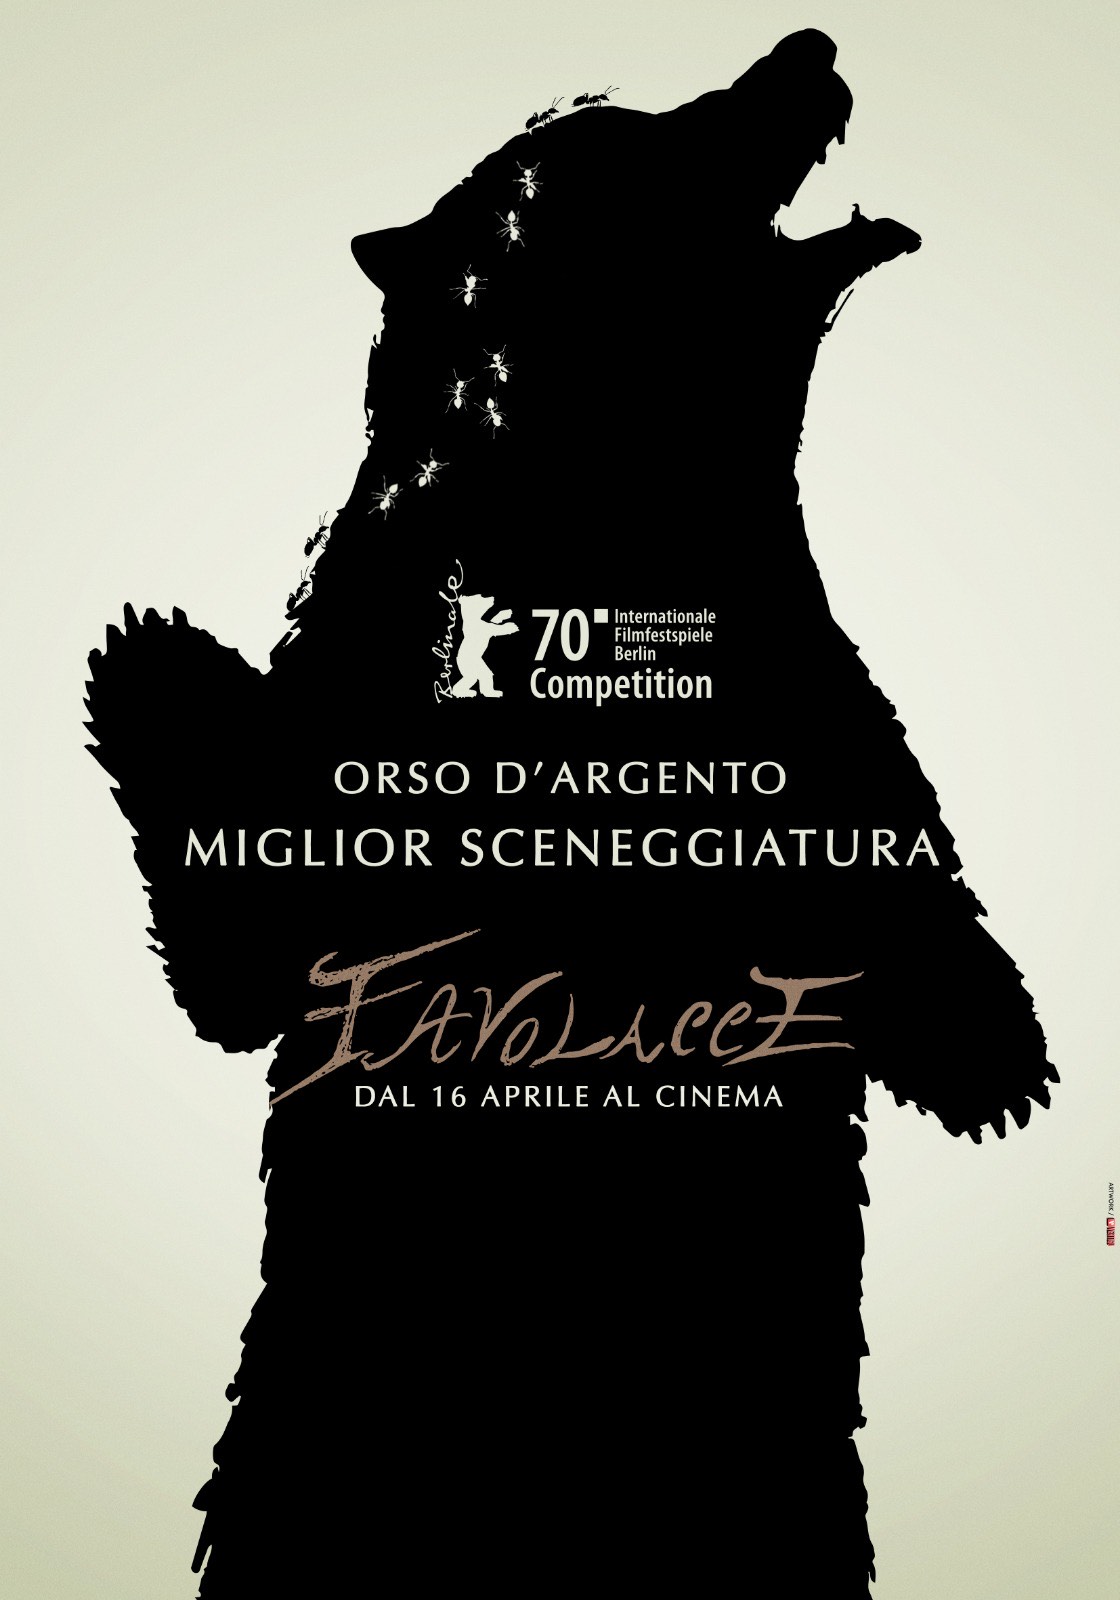 Bad Tales wins the Silver Bear at the 70th Berlinale